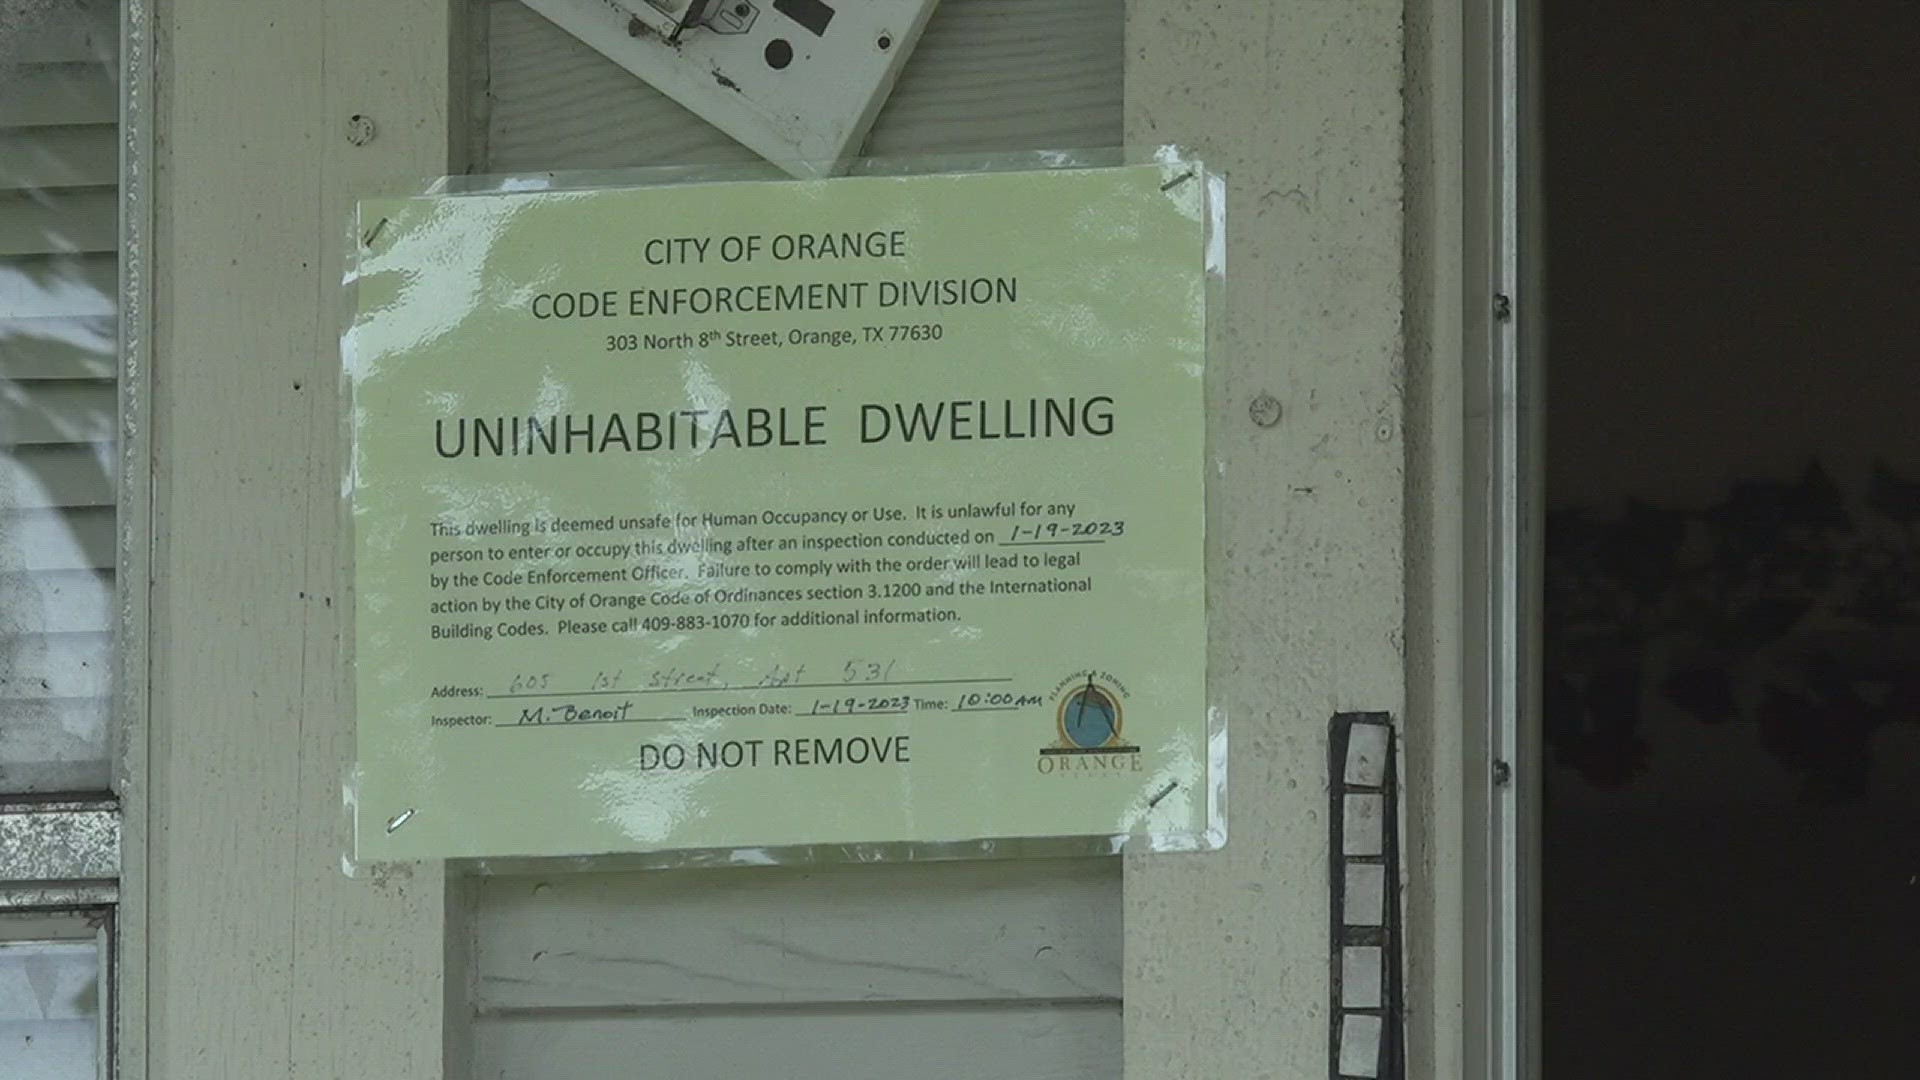 On Tuesday morning, the Orange City Council approved a $145,000 bid from The Lark Group to demolish the nine buildings that aren't up to city code and unlivable.